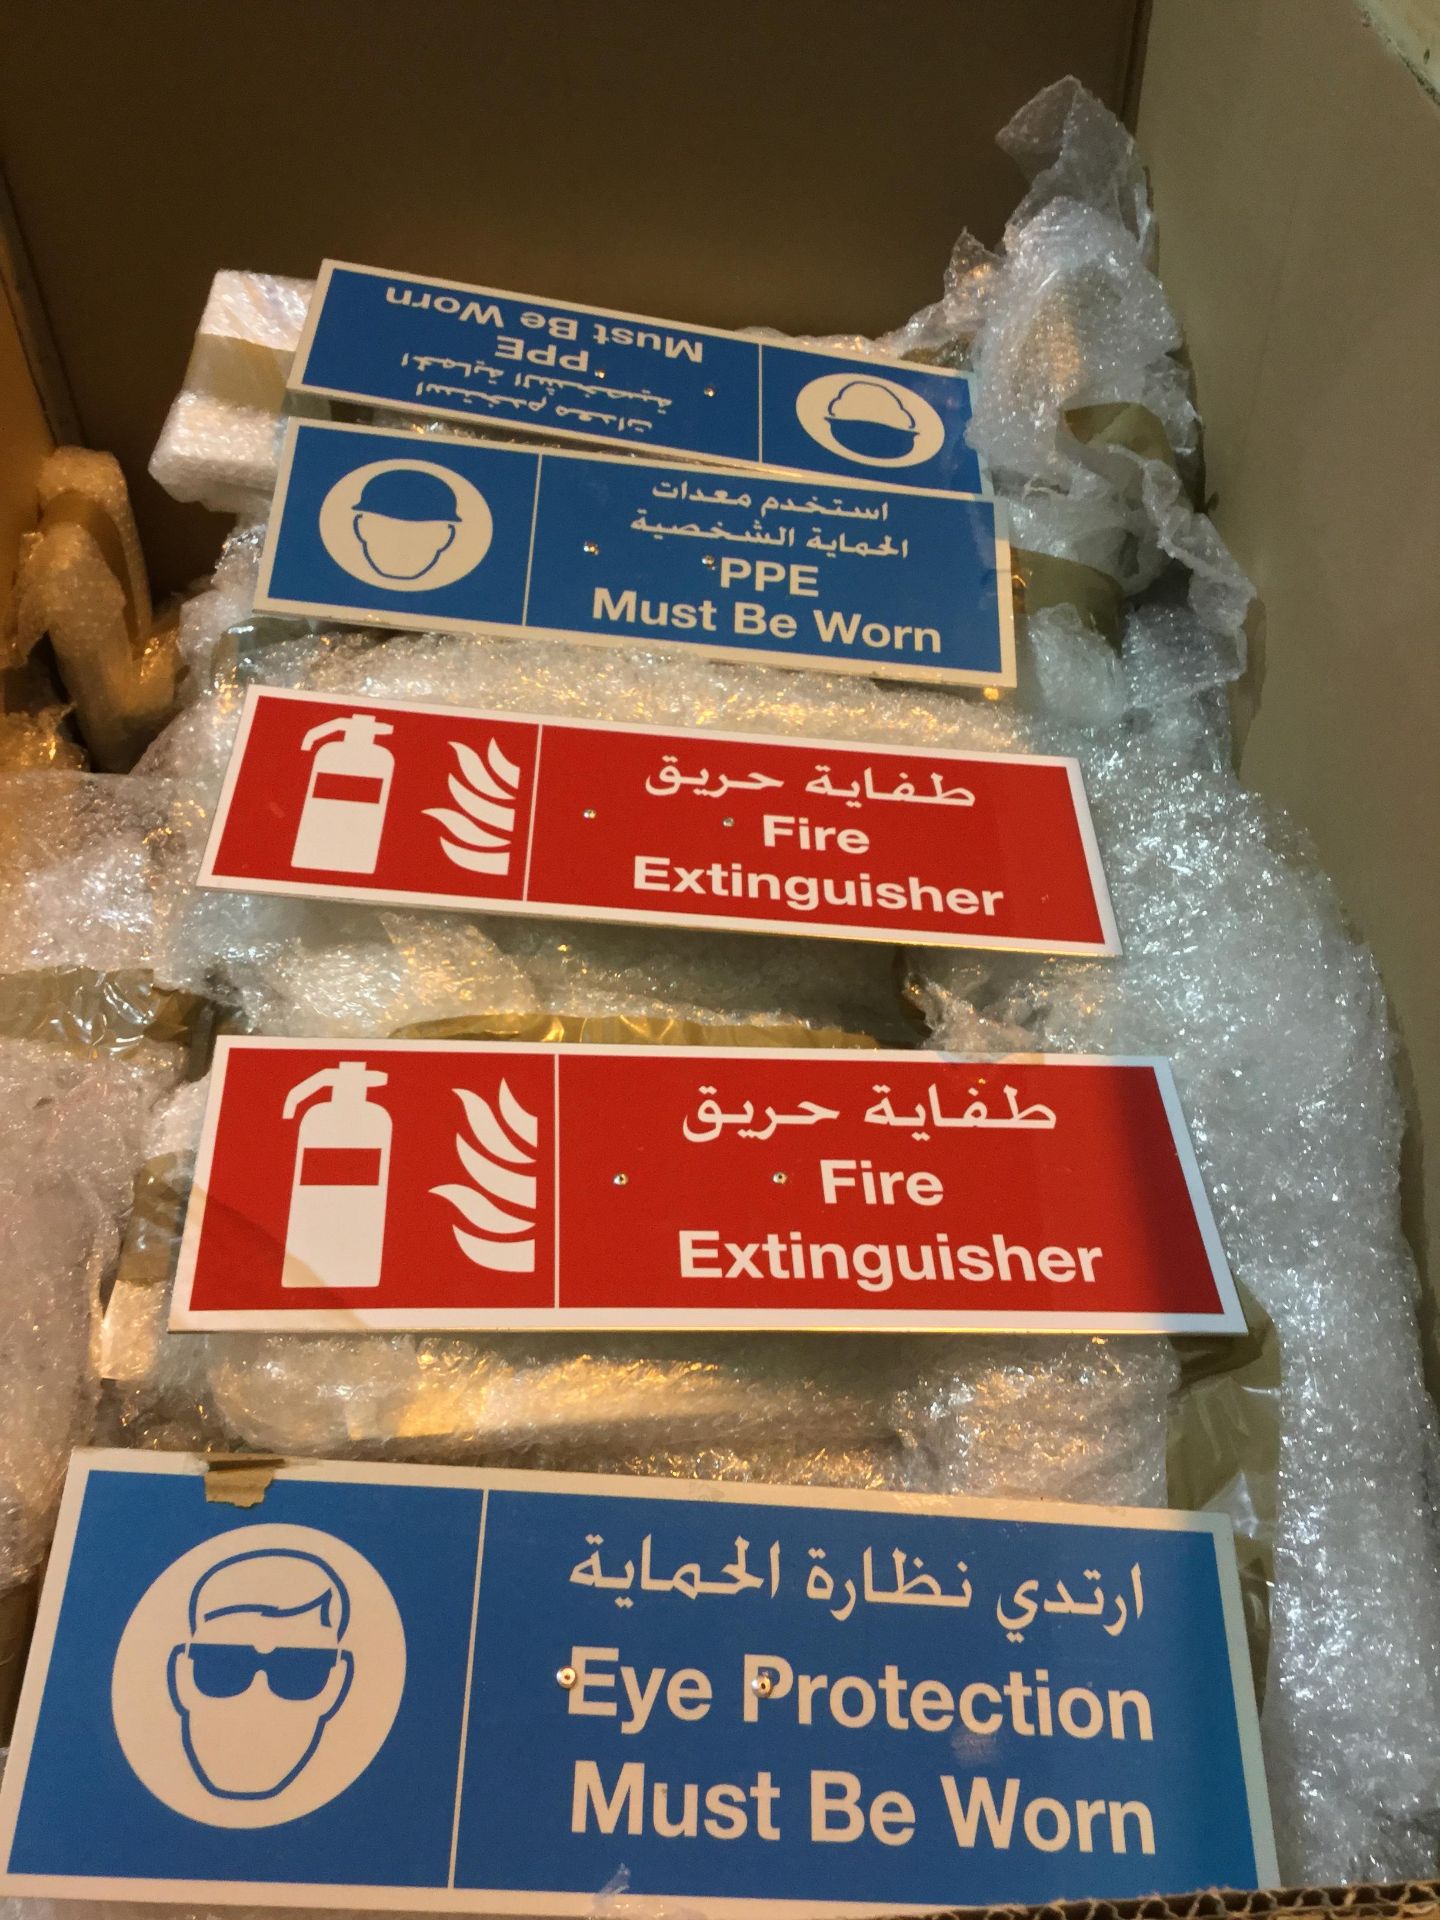 various Site signs in Arabic and English